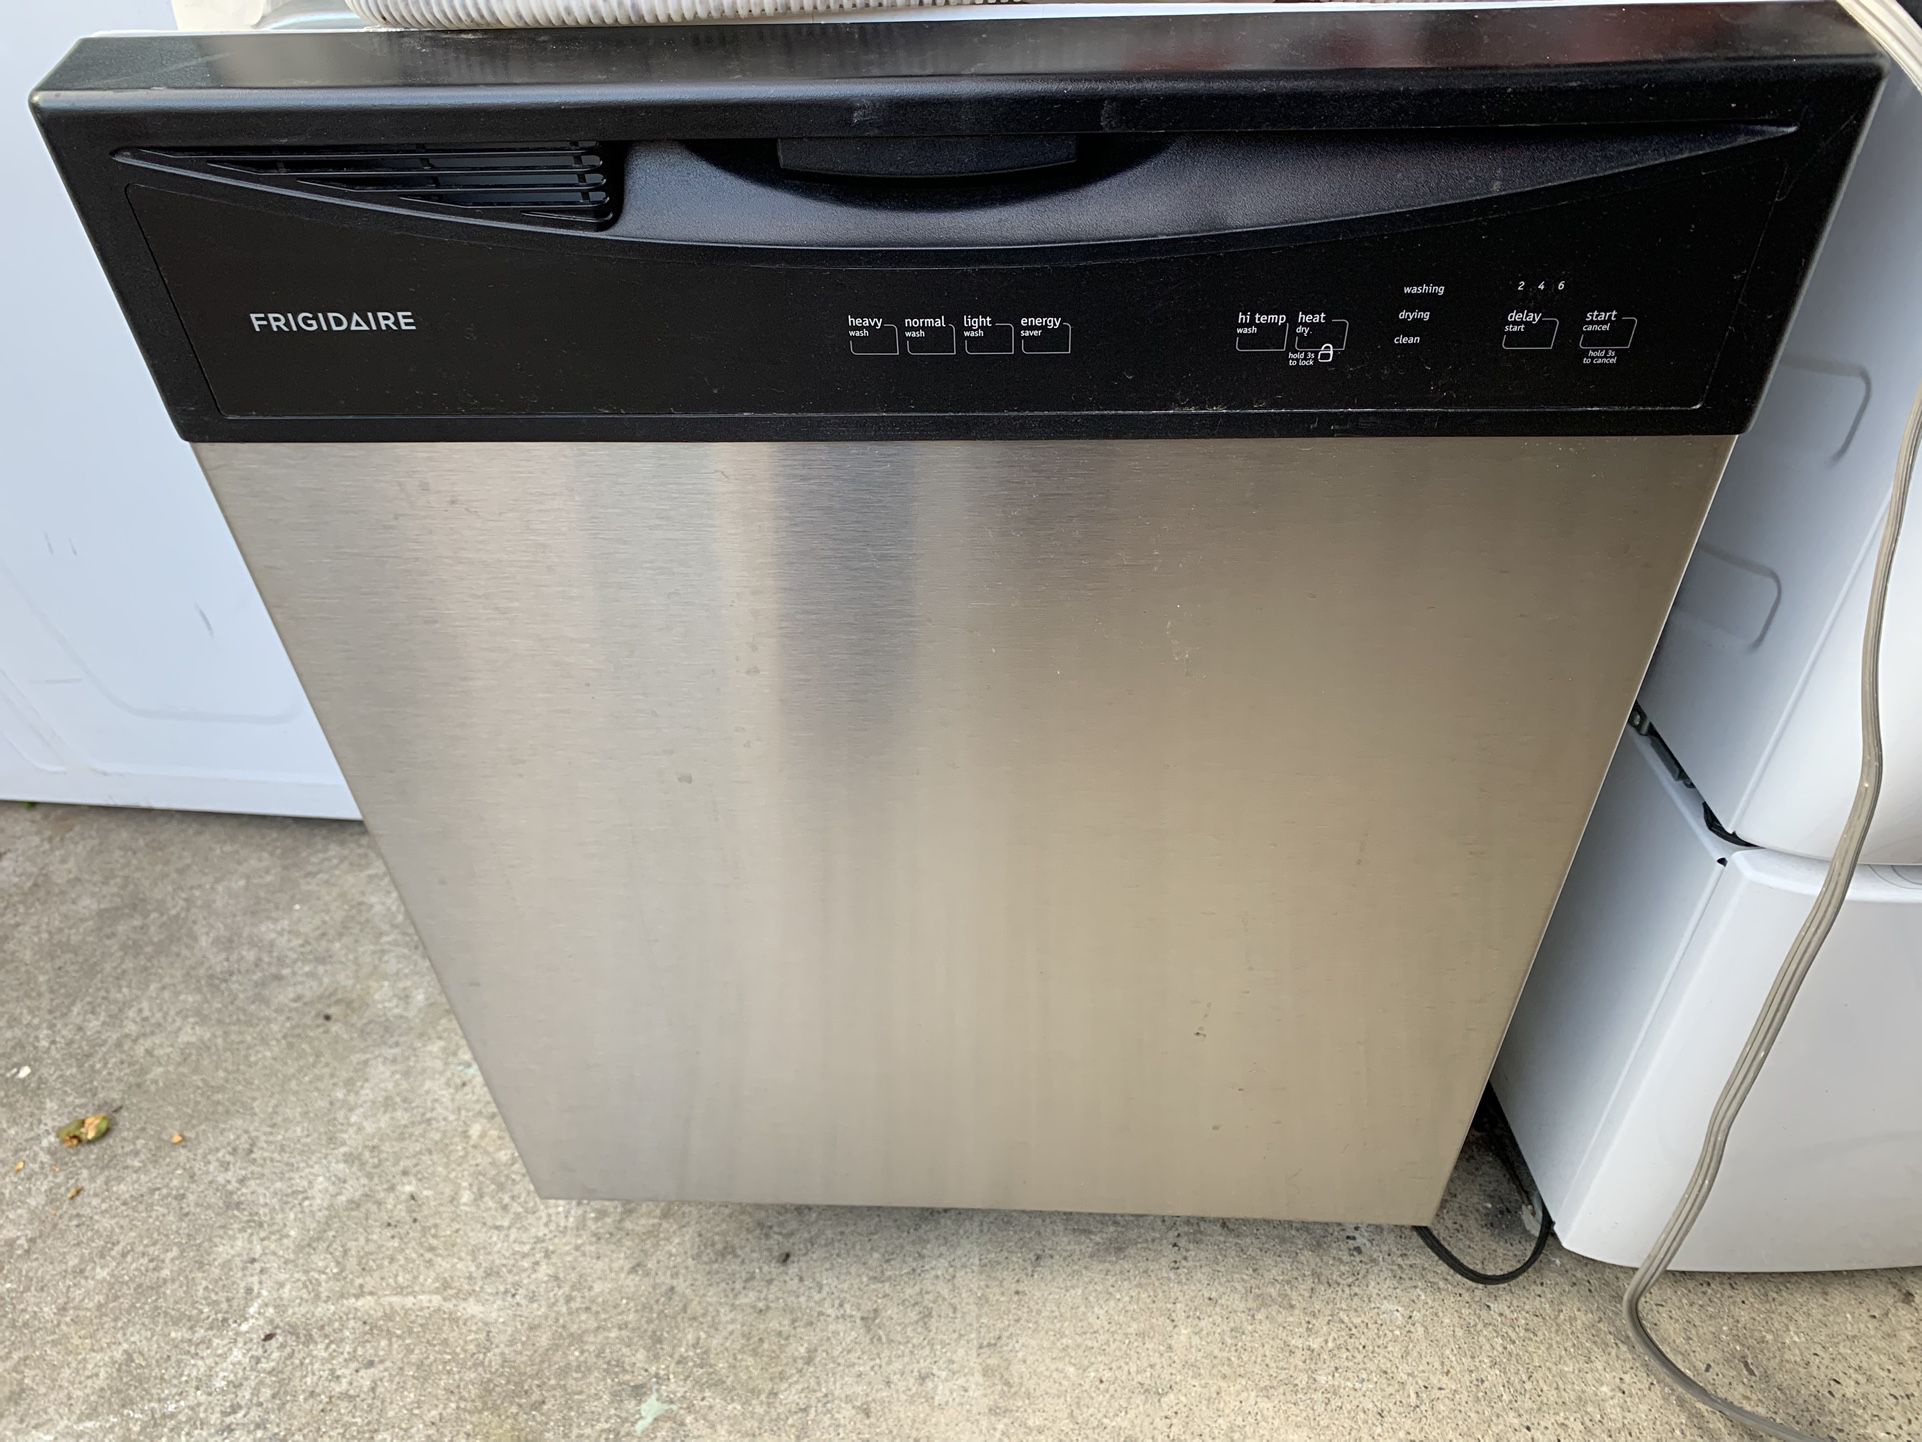 Frigidaire Stainless Steel Dishwasher Energy Star Rated 